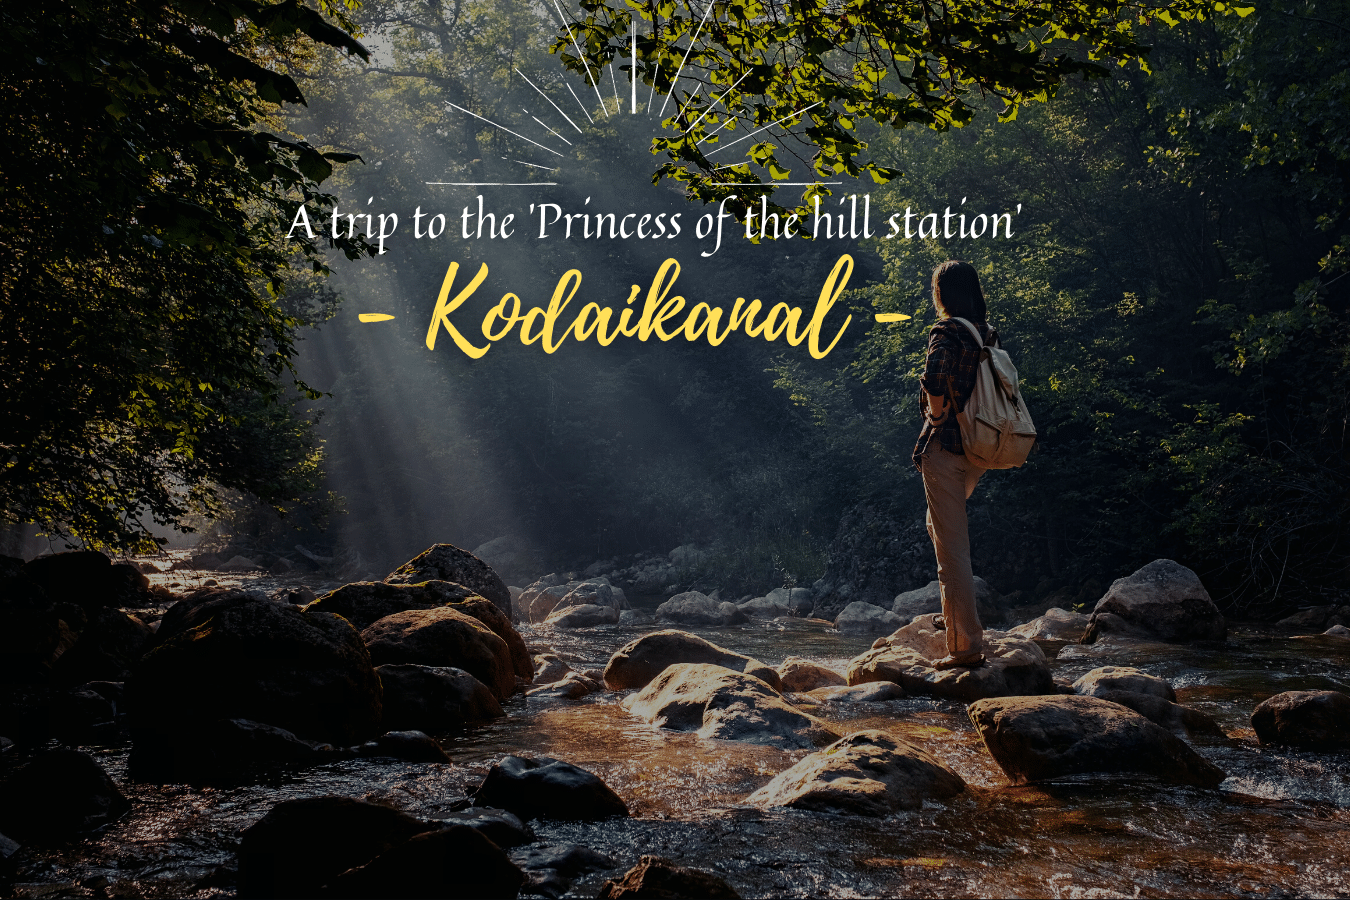 Welcome to Kodaikanal, Welcome to Kodikanal, a pictureqsue hill station, encompassed by endless charm